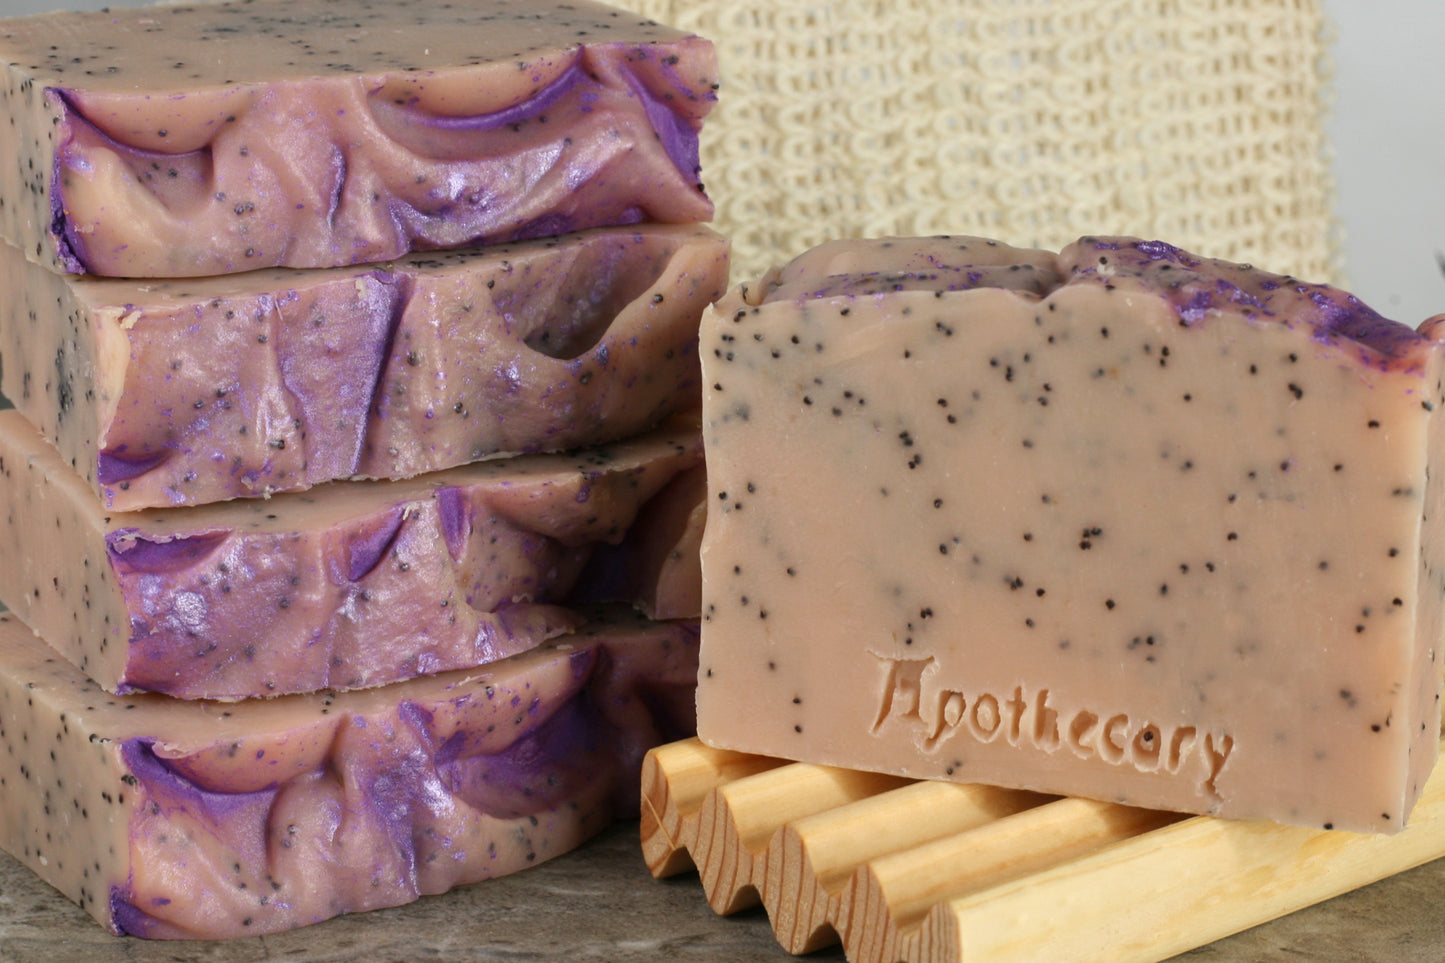 Pink dragonfruit soap with exfoliating poppyseeds and a sparkly purple top